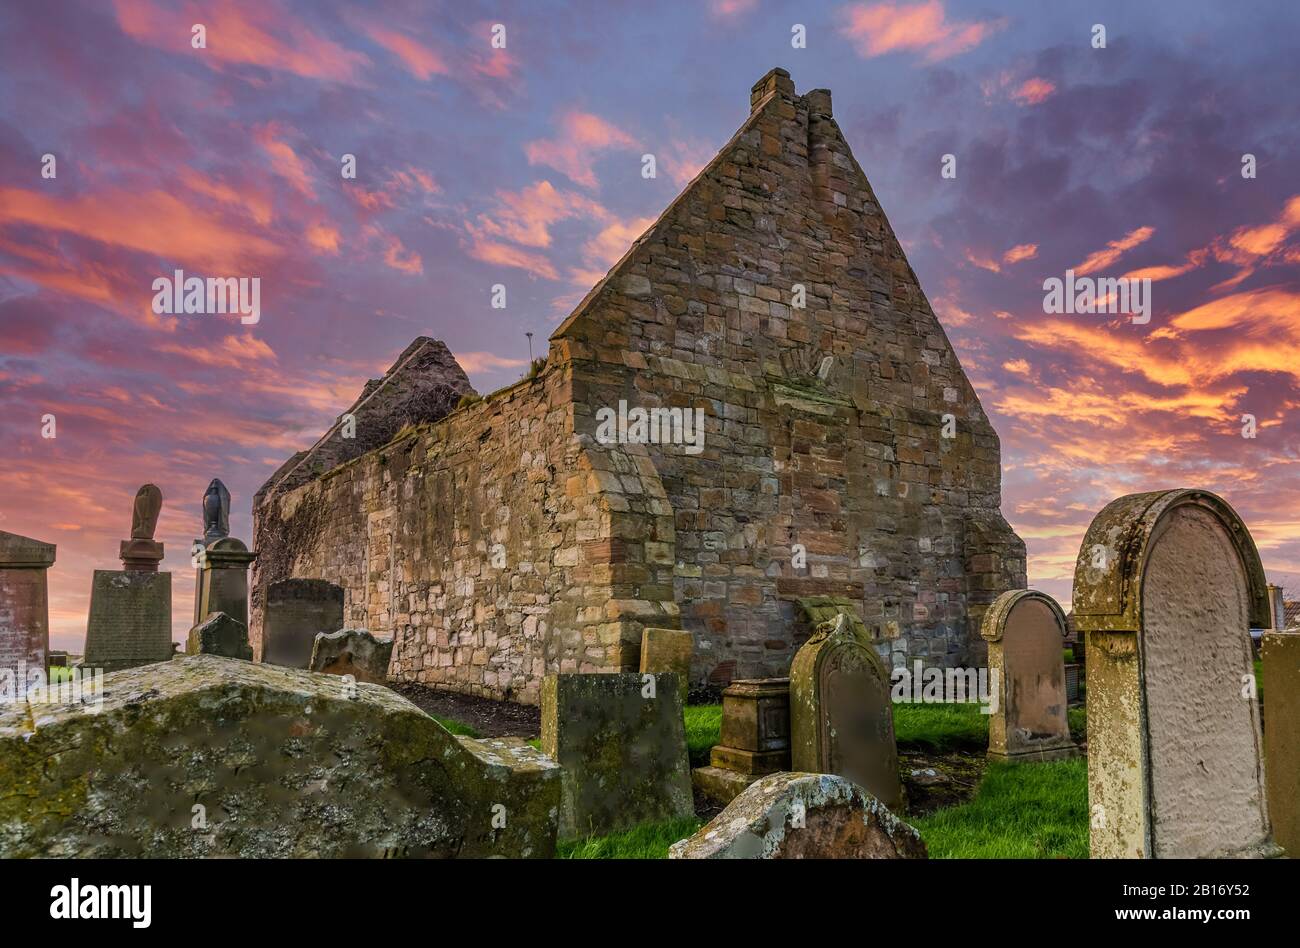 The Old Ruins of Prestwick Old Parish Church & Graveyard Rear ellevation taken agianst a Dramatic Red Sunset Sky. Stock Photo